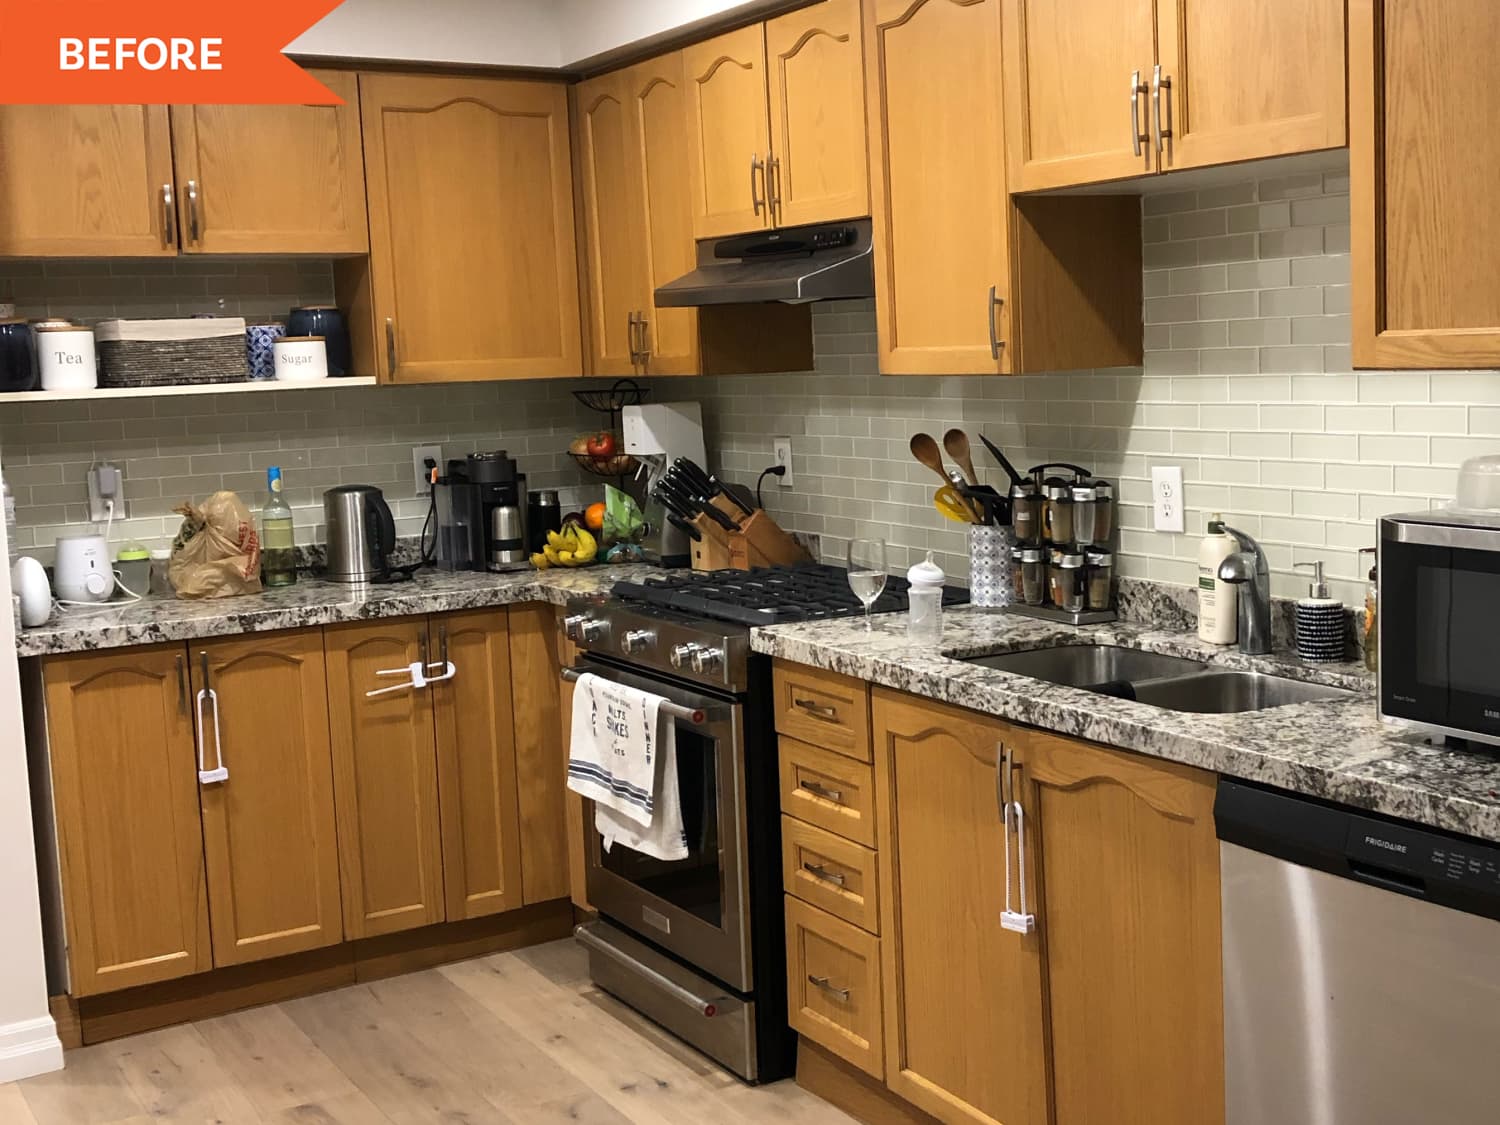 Kitchen Redo with White IKEA SEKTION Cabinets - Before and After Photos |  Apartment Therapy